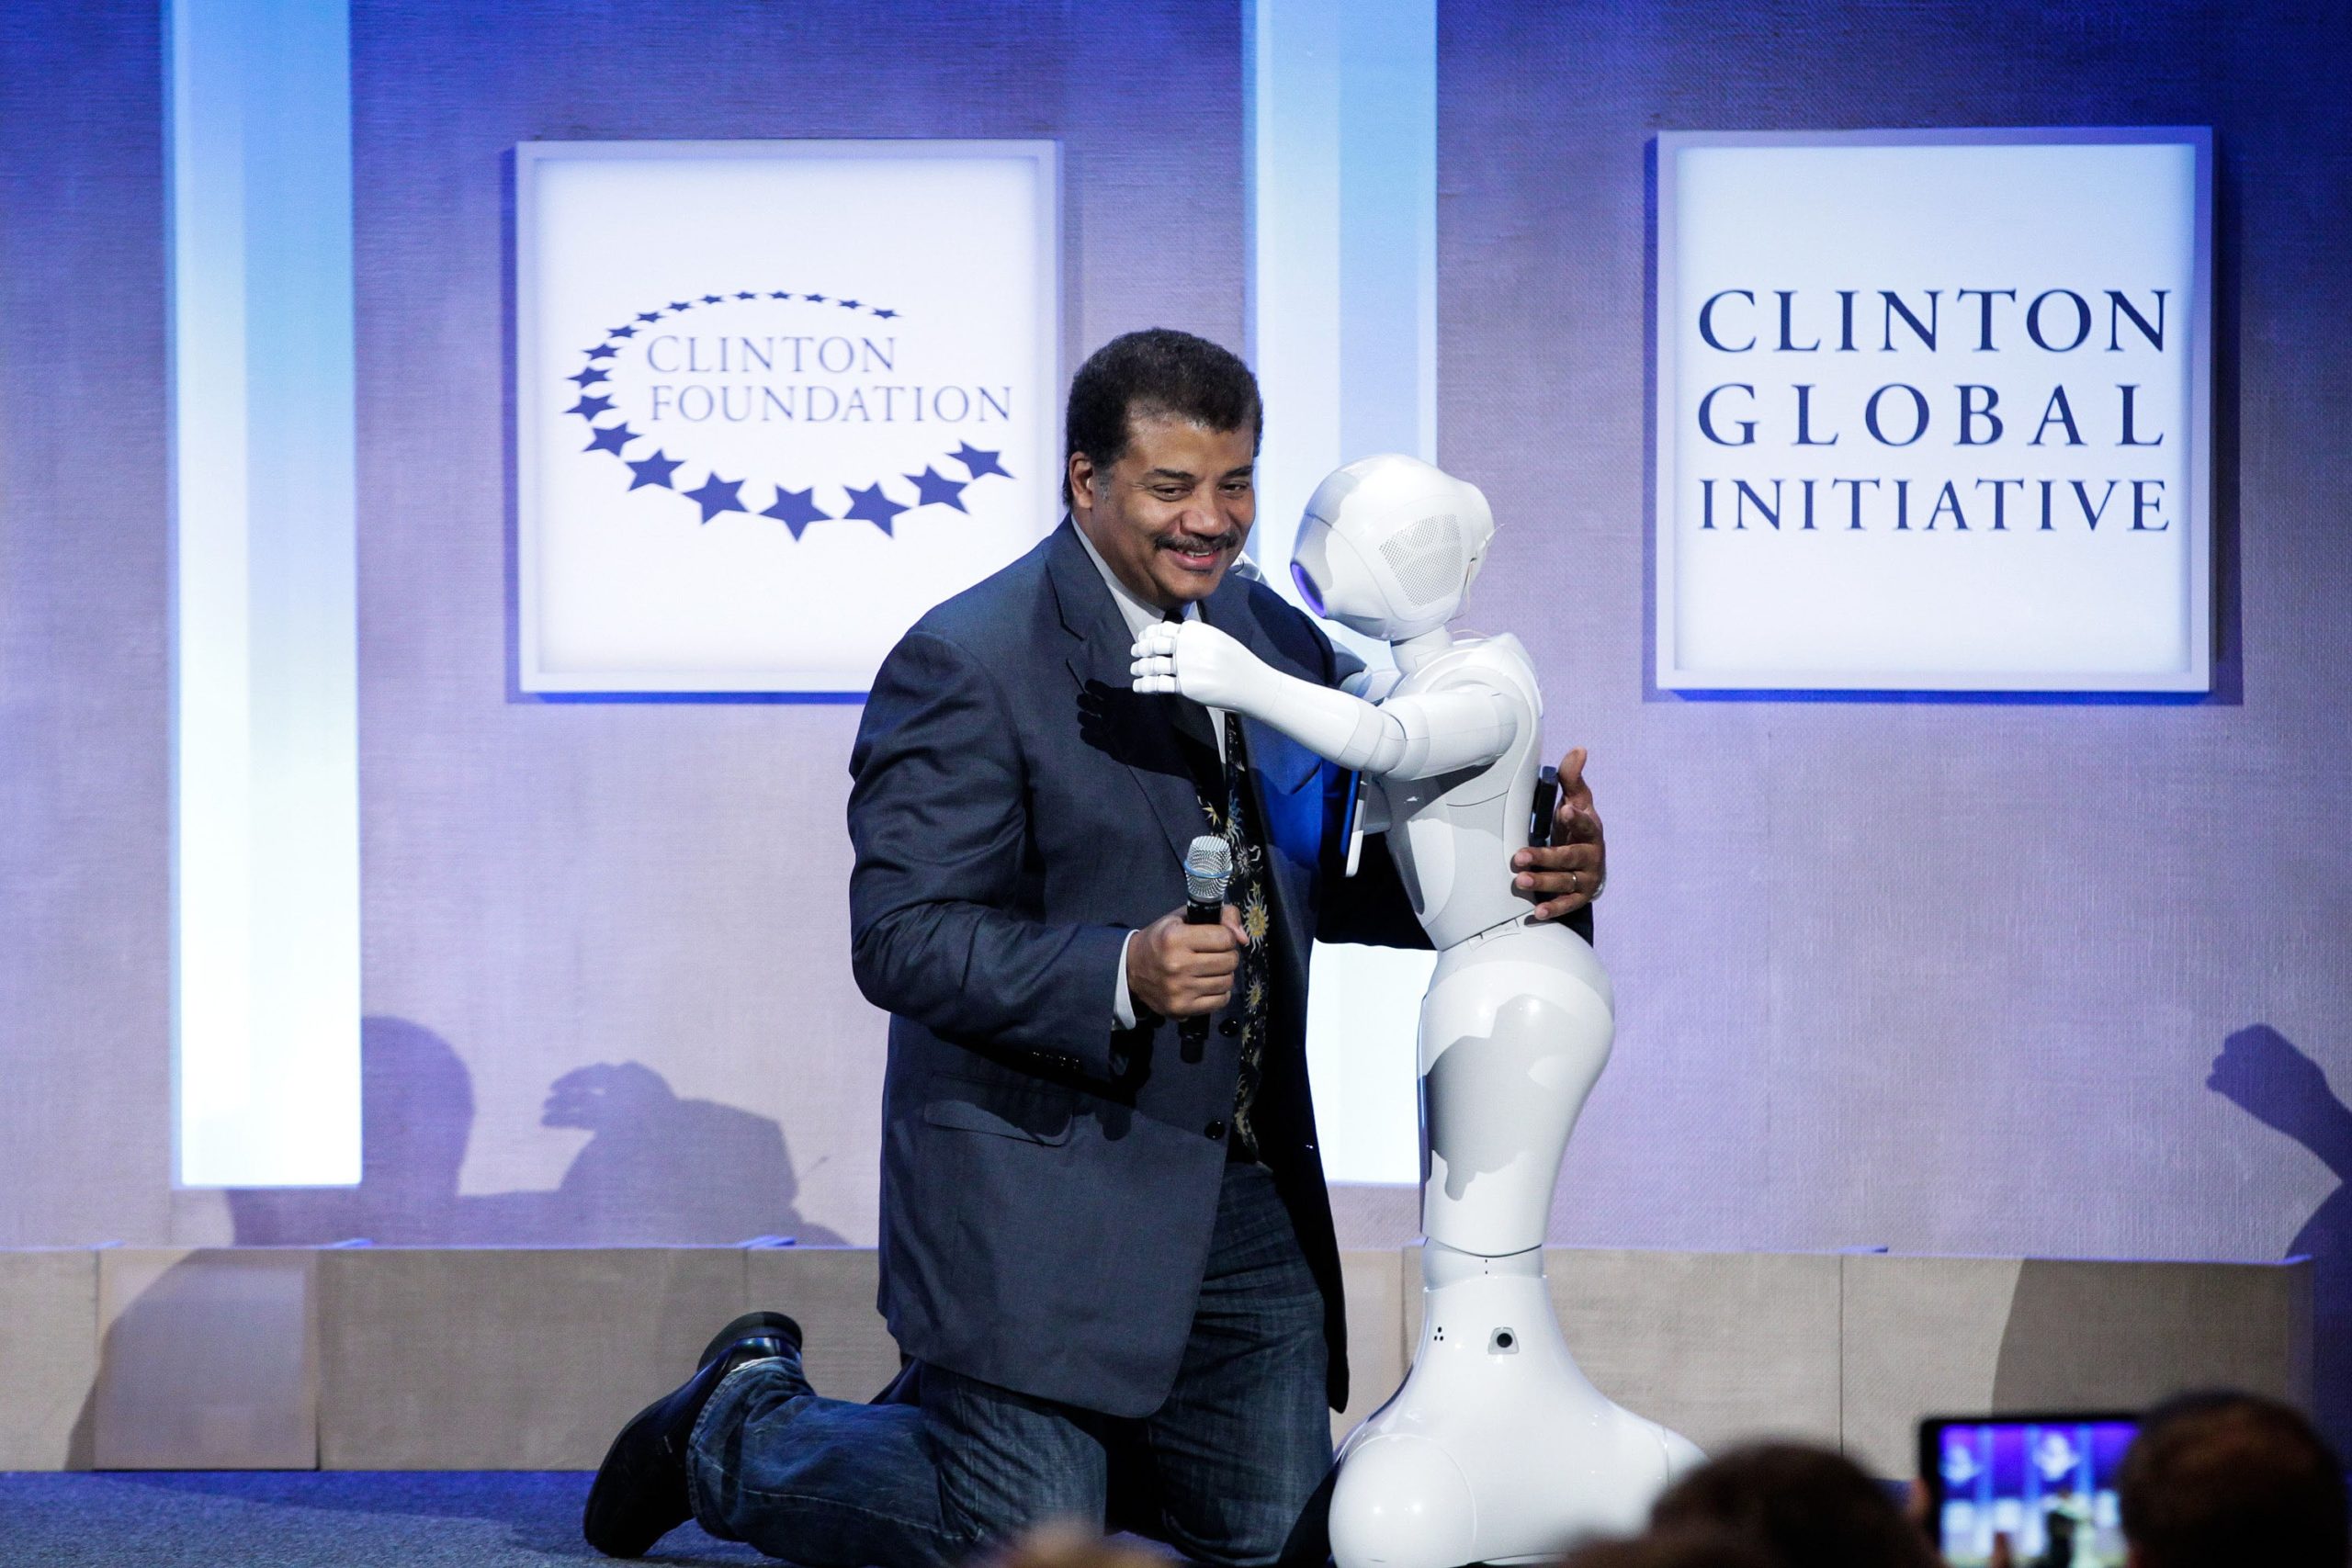 Neil deGrasse Tyson hugs Pepper at the Looking to the Next Frontier session during the 2015 Clinton Global Initiative's Annual Meeting at the Sheraton New York Hotel & Towers on September 28, 2015 in New York City. (Photo: JP Yim, Getty Images)